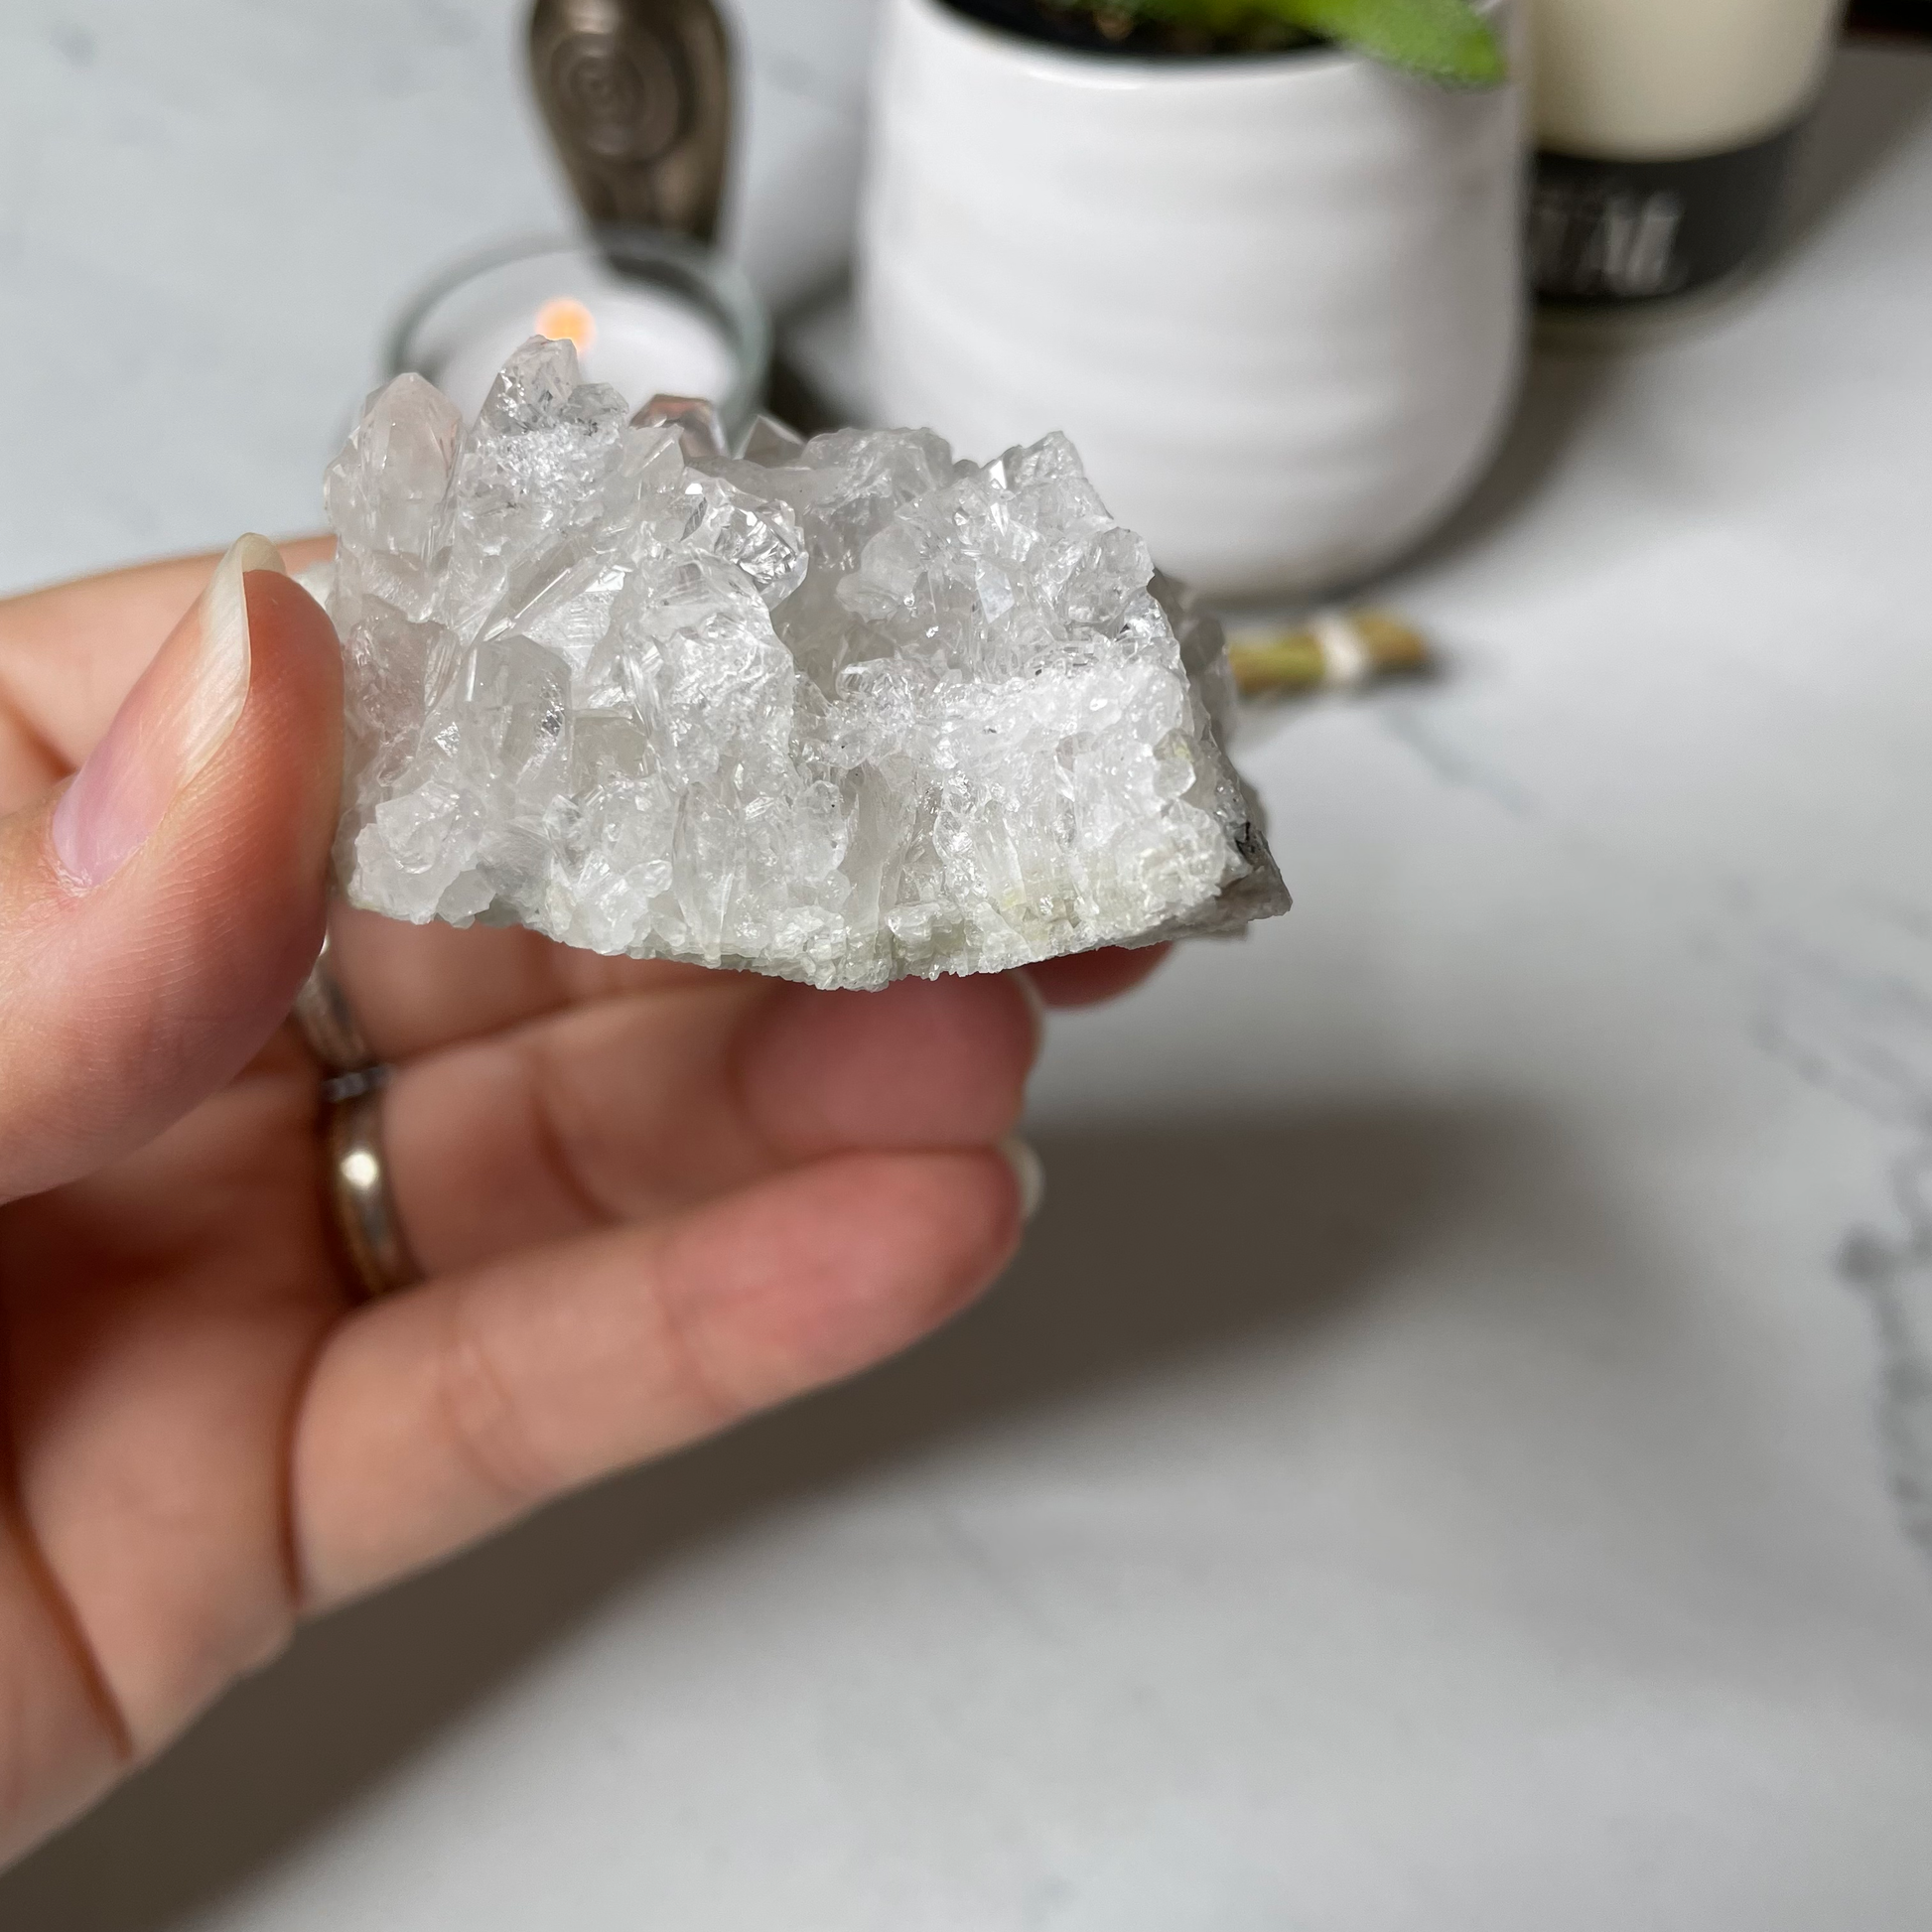 Freya's Haven | Metaphysical & Crystal shop | A close up photo of a Clear Quartz Cluster held in a woman's hand with candles in the background.